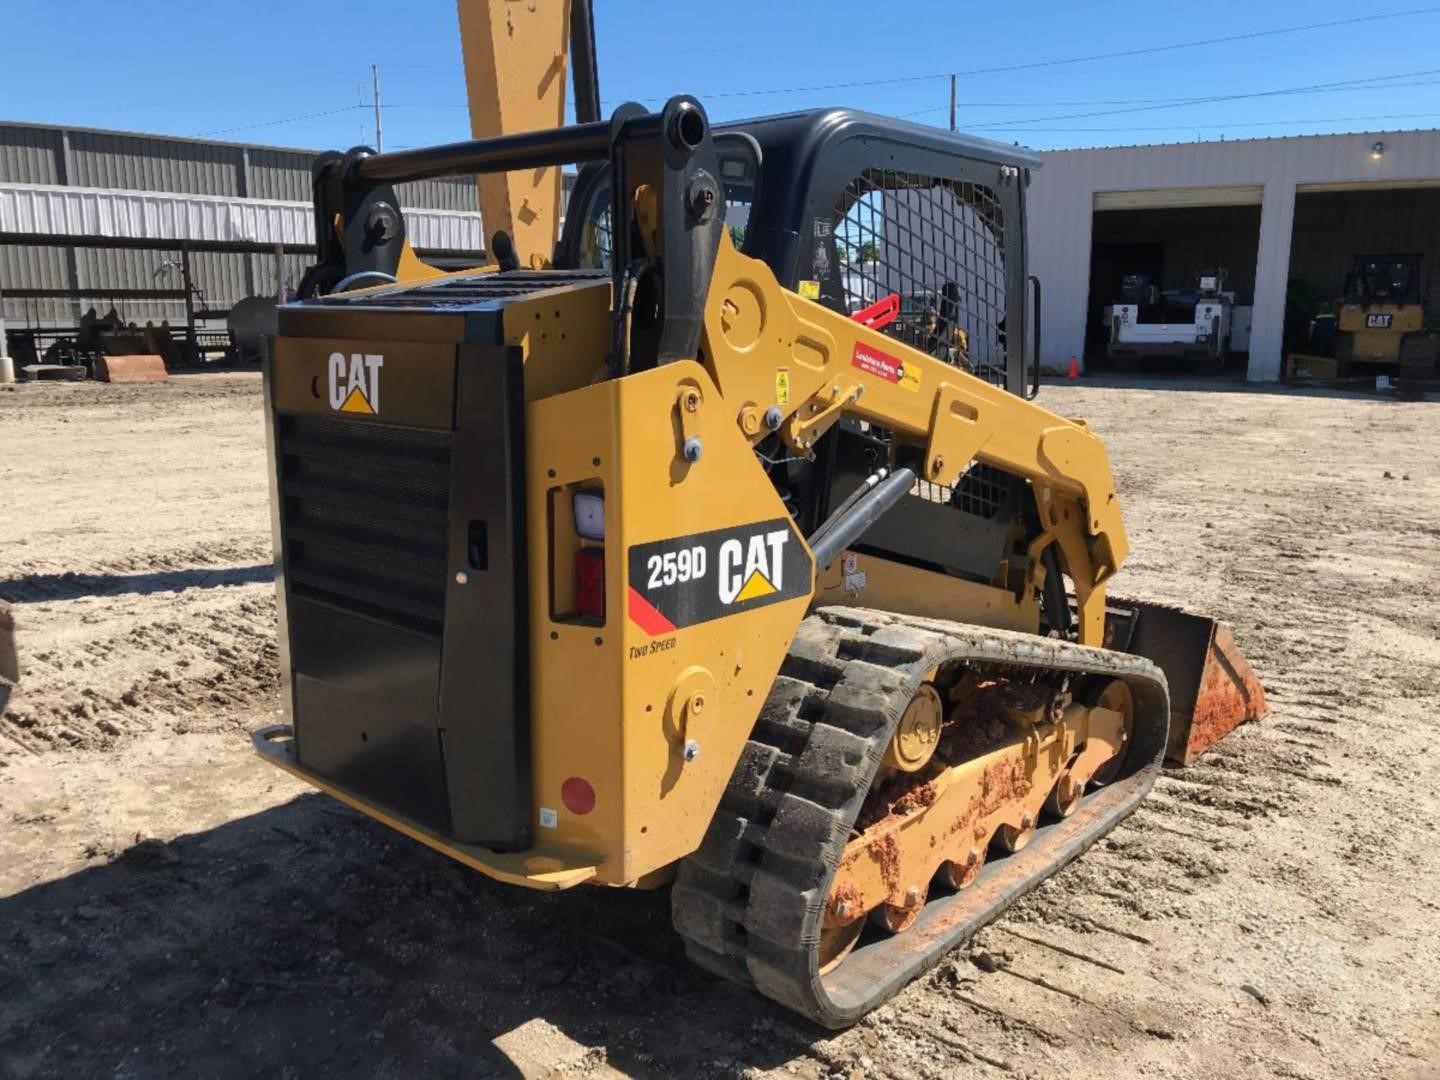 2018 CATERPILLAR 259D For Sale in Reserve, Louisiana | MachineryTrader.com